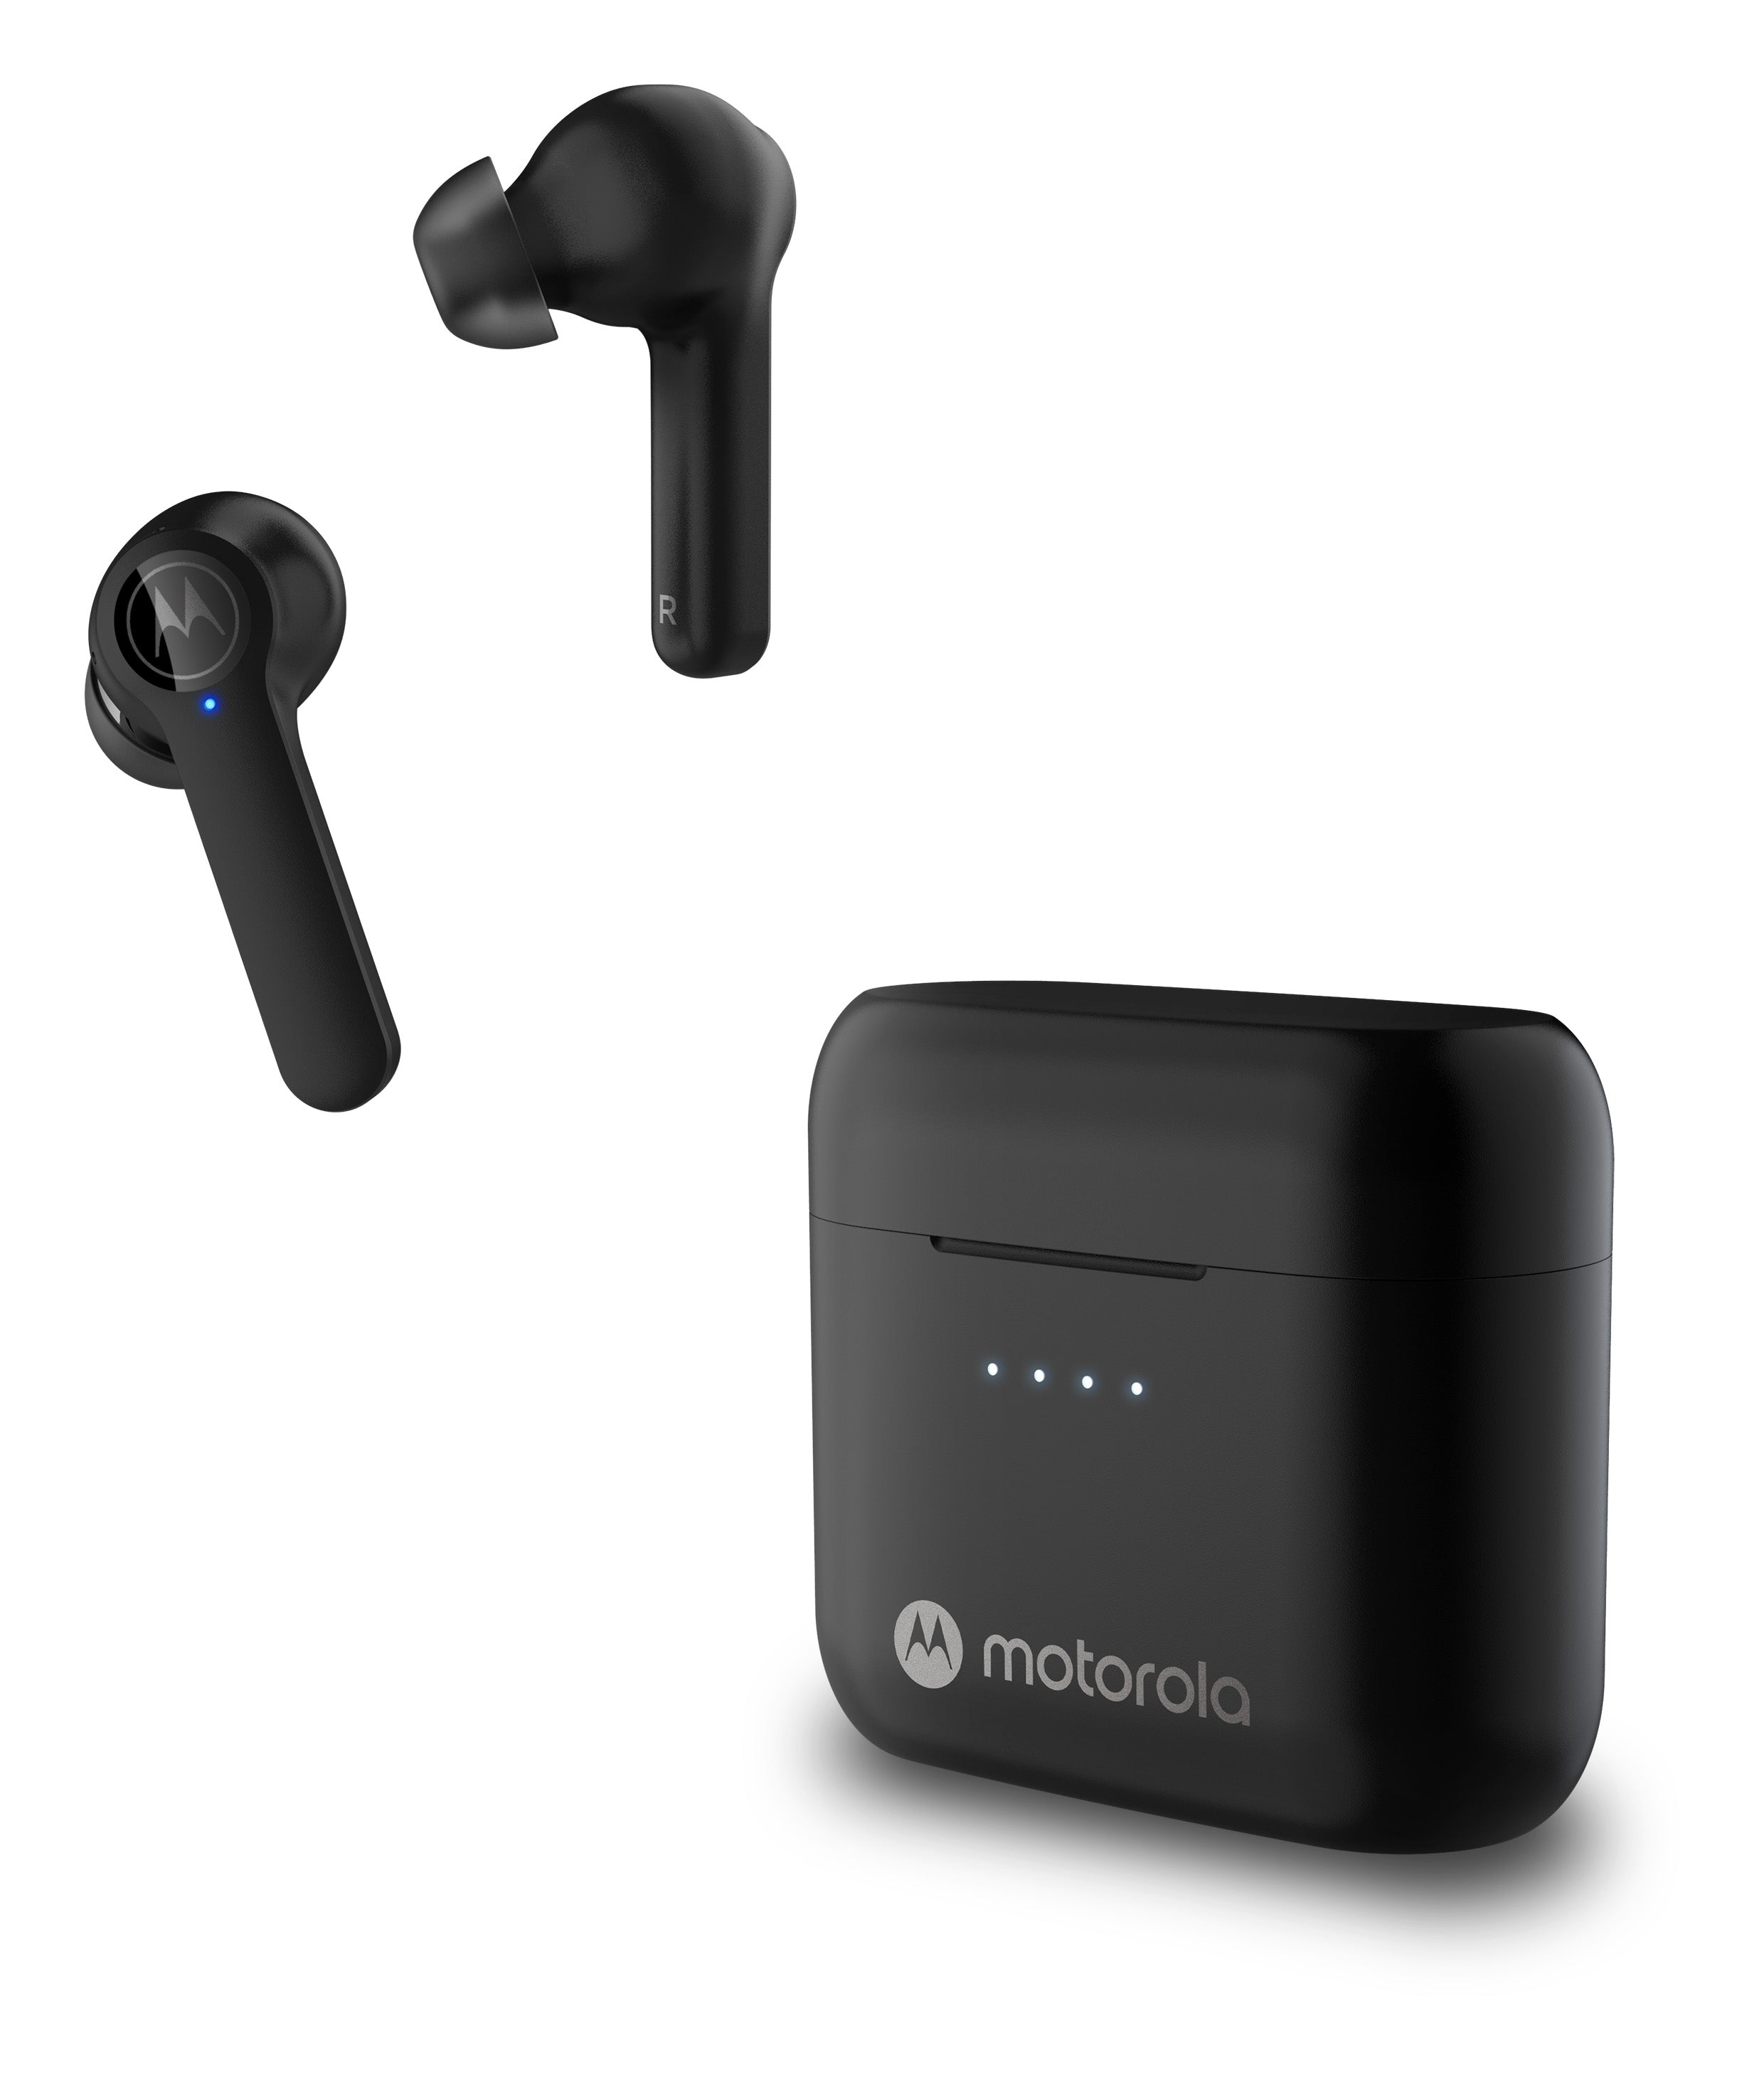 Motorola MOTO BUDS-S ANC, True Wireless Earbuds with Active Noise Cancellation